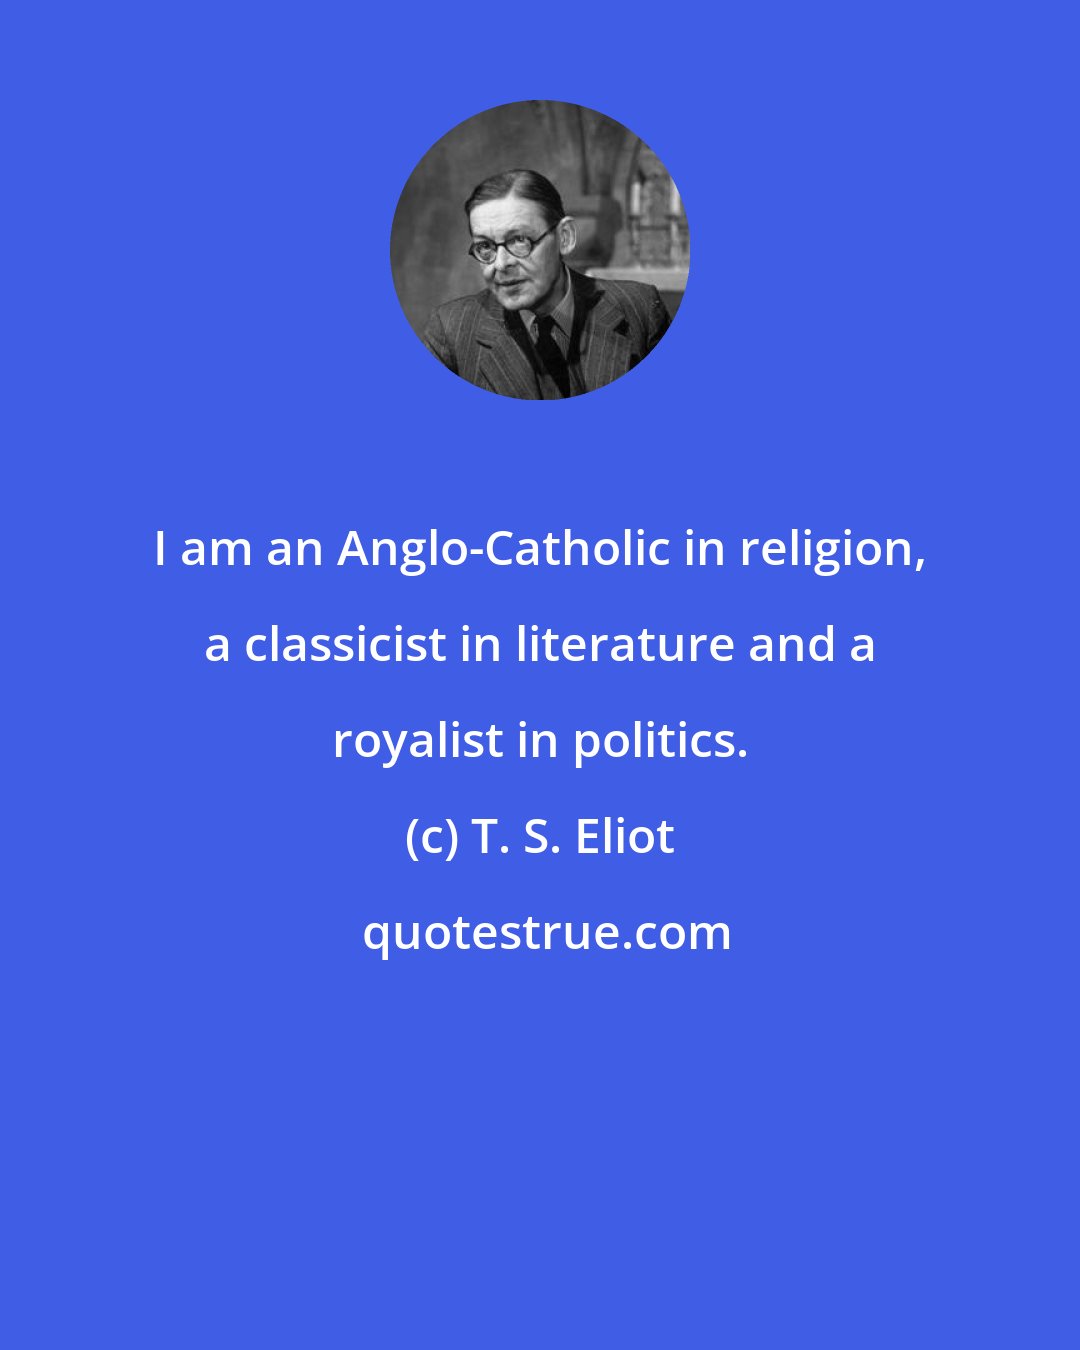 T. S. Eliot: I am an Anglo-Catholic in religion, a classicist in literature and a royalist in politics.